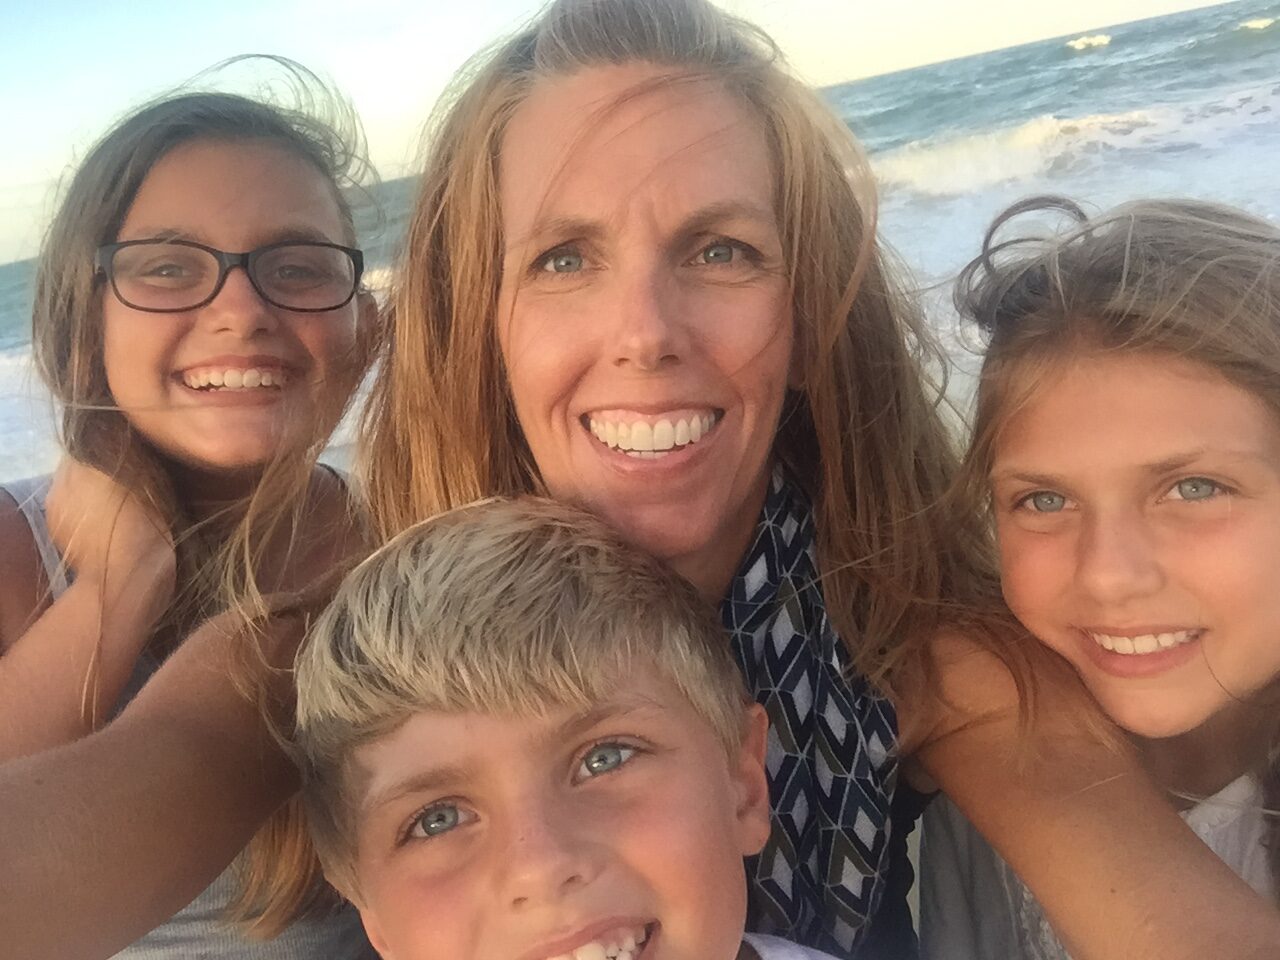 A woman and her children are taking a selfie on the beach, showcasing their empowered post-split support.